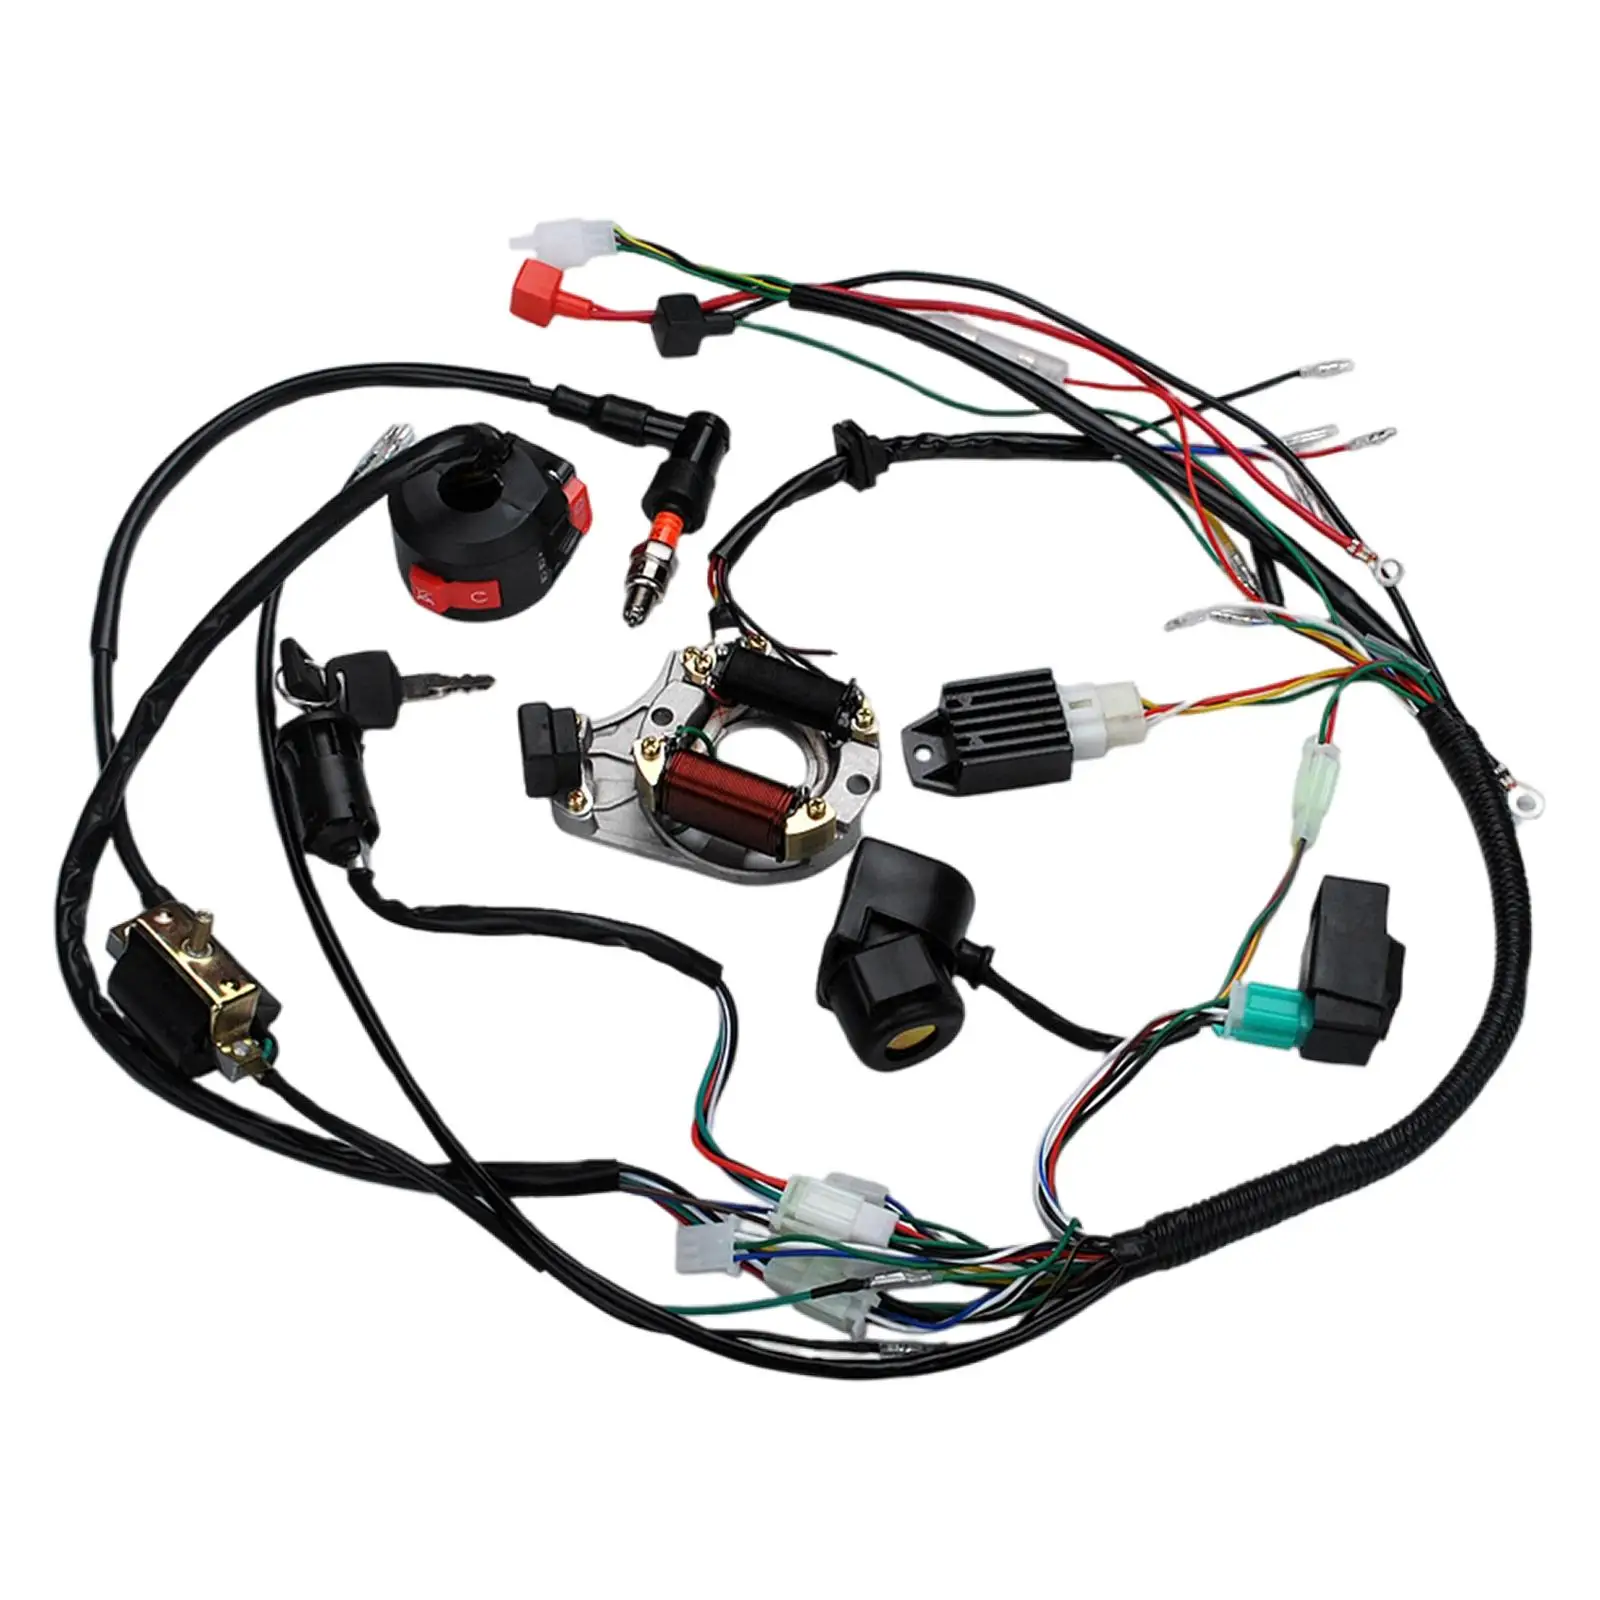 Complete Electrics Wire Harness Kit Solenoid Relay Coil Stator for Motorcycle Scooter Buggy 4 Wheelers Stroke 50cc -125cc